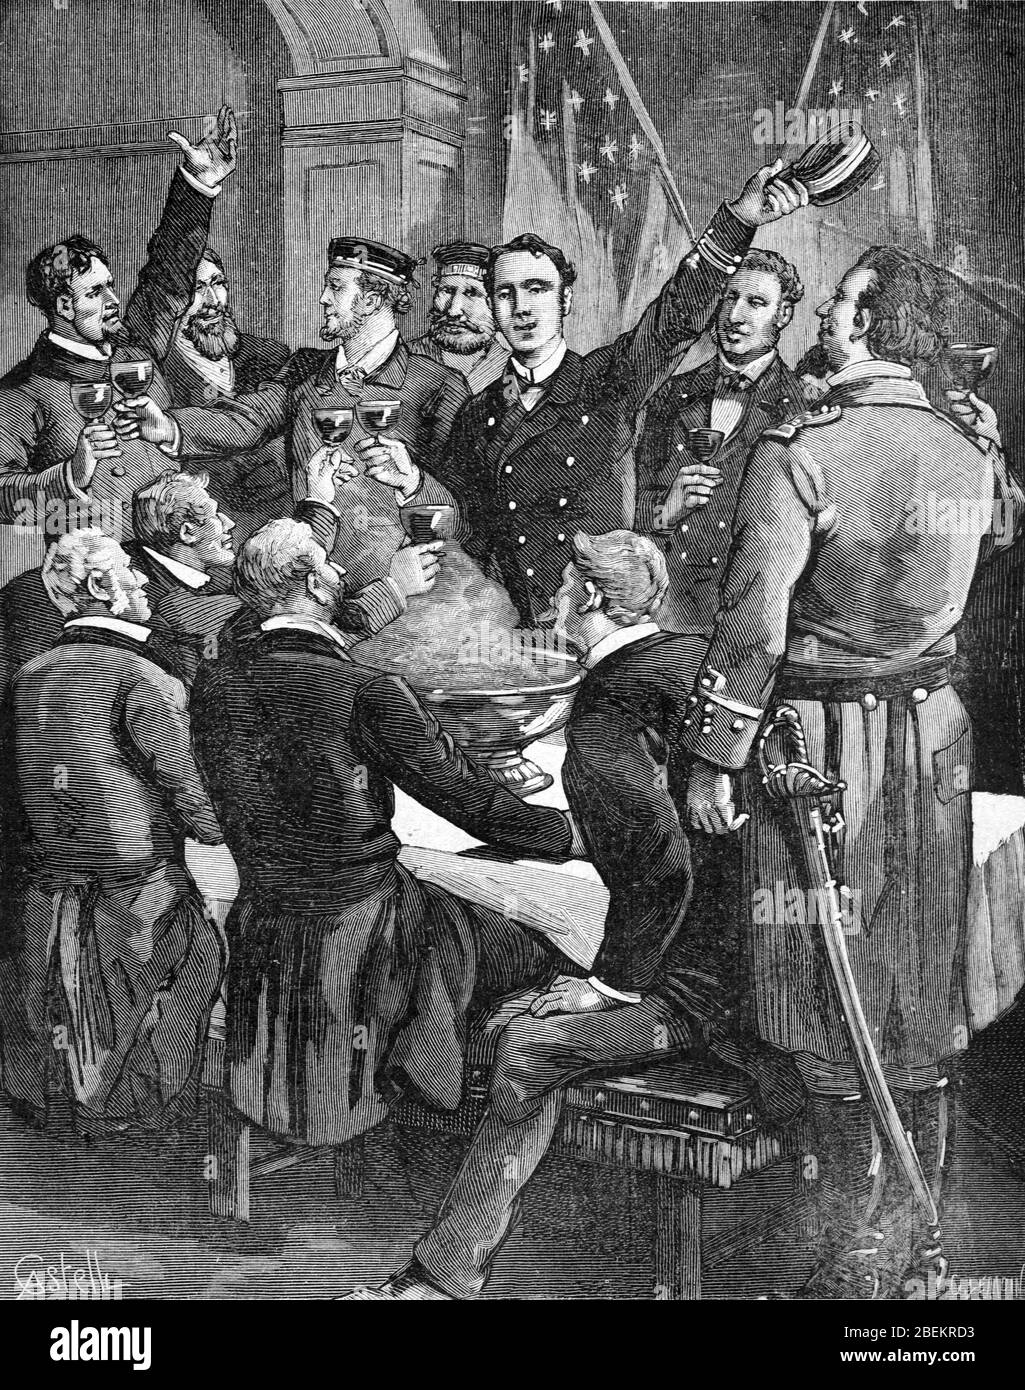 Unionists of the American Civil War (1861-1865) aka American War of Secession. Vintage or Old Illustration or Engraving 1887 Stock Photo